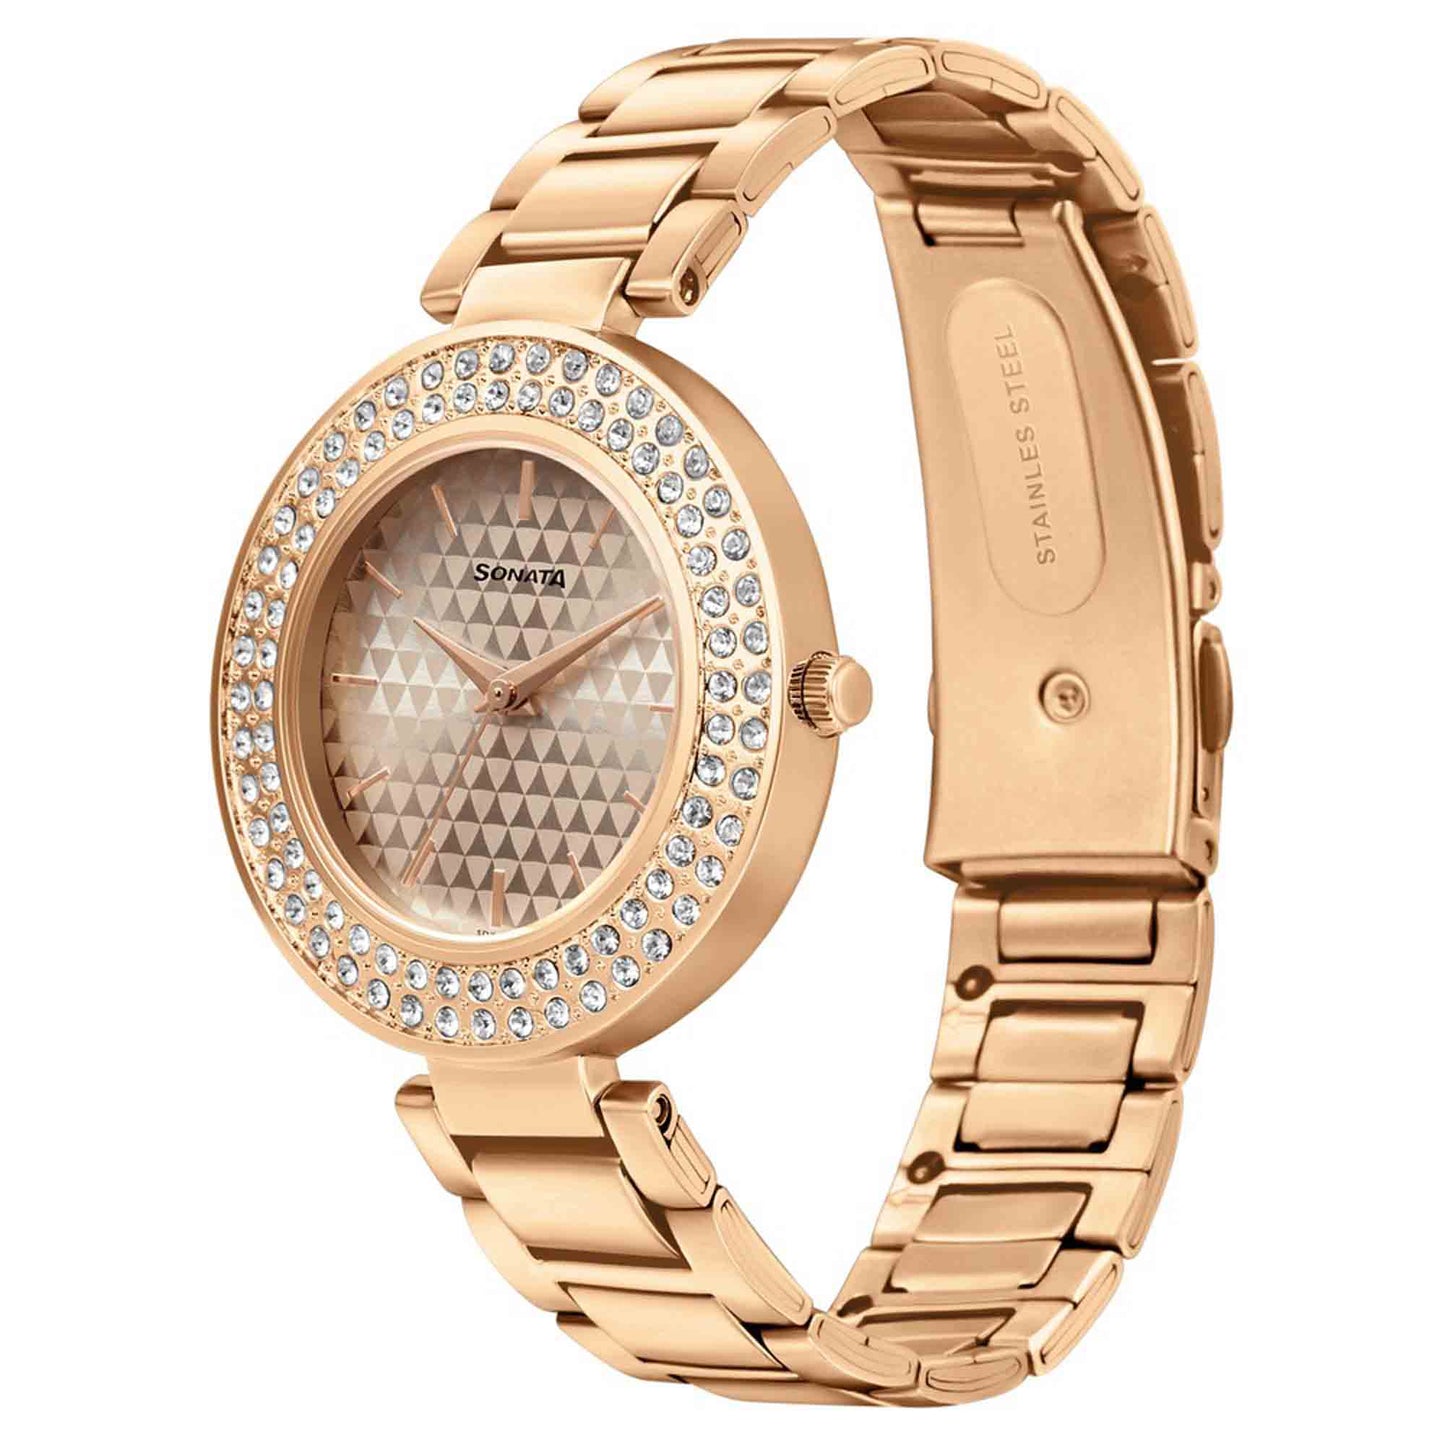 Sonata Blush It Up Rose Gold Dial Women Watch With Stainless Steel Strap